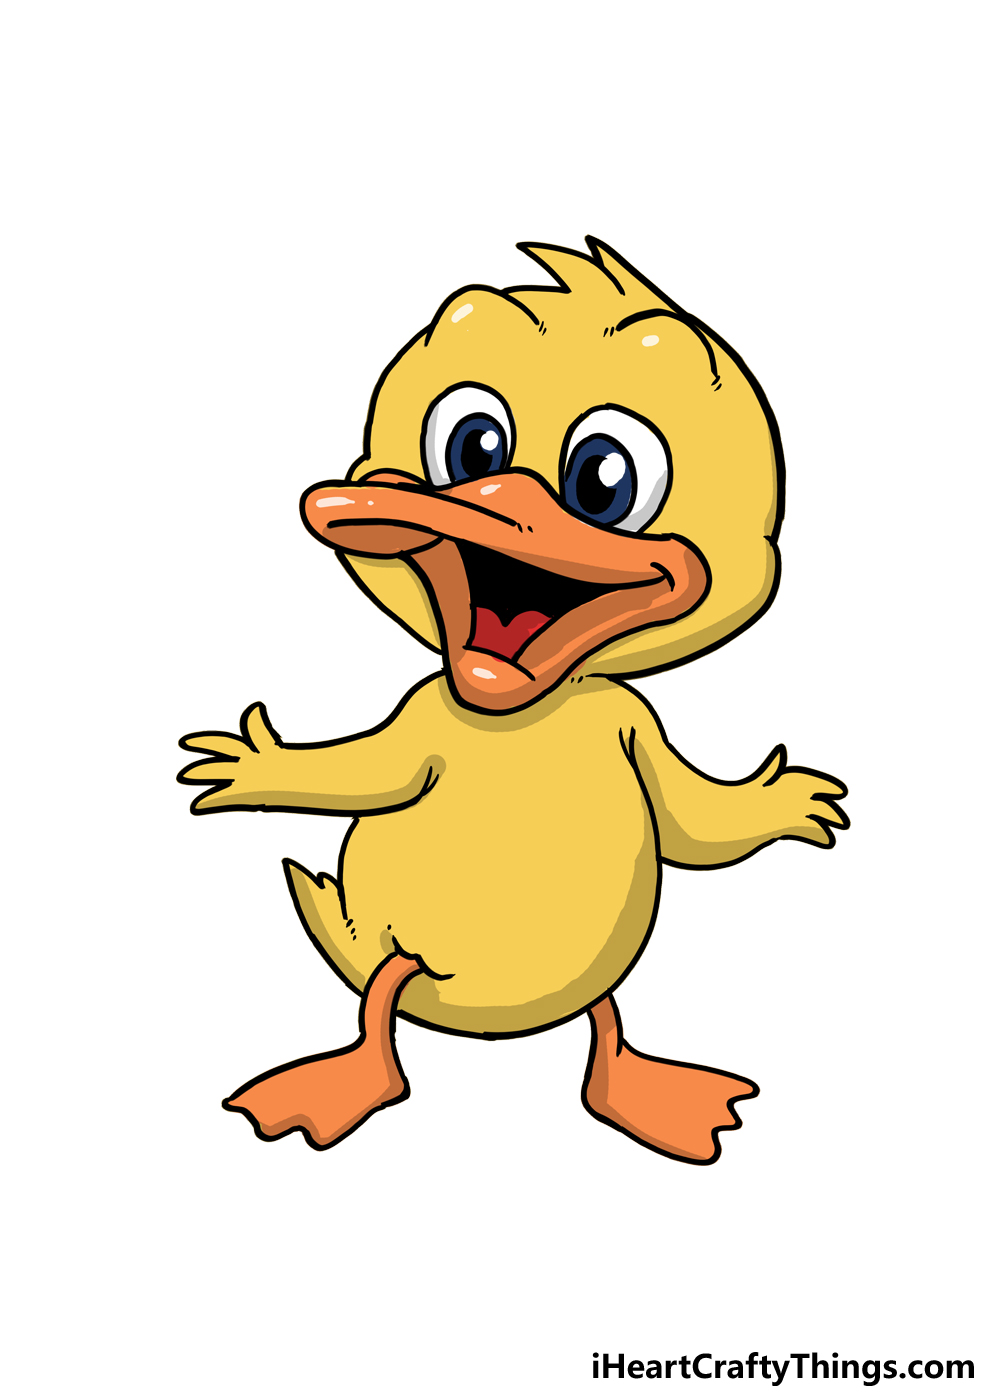 How to Draw A Cartoon Duck step 6